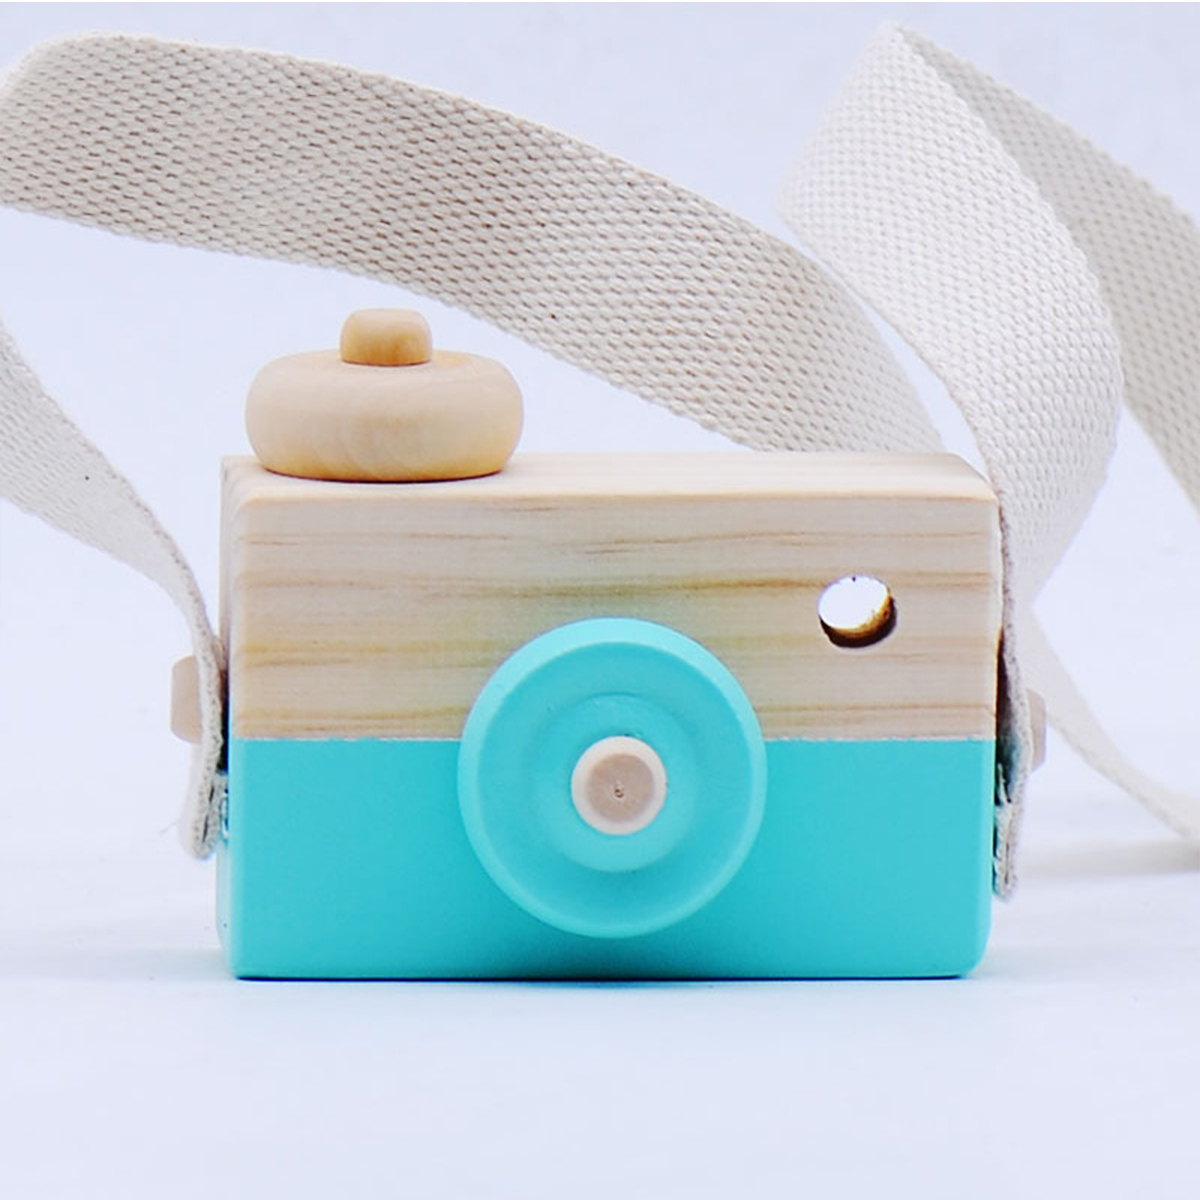 Wearable-Childrens-Wooden-Camera-Ornaments-Mini-Portable-Educational-Toys-Photography-Cute-Props-1573498-7